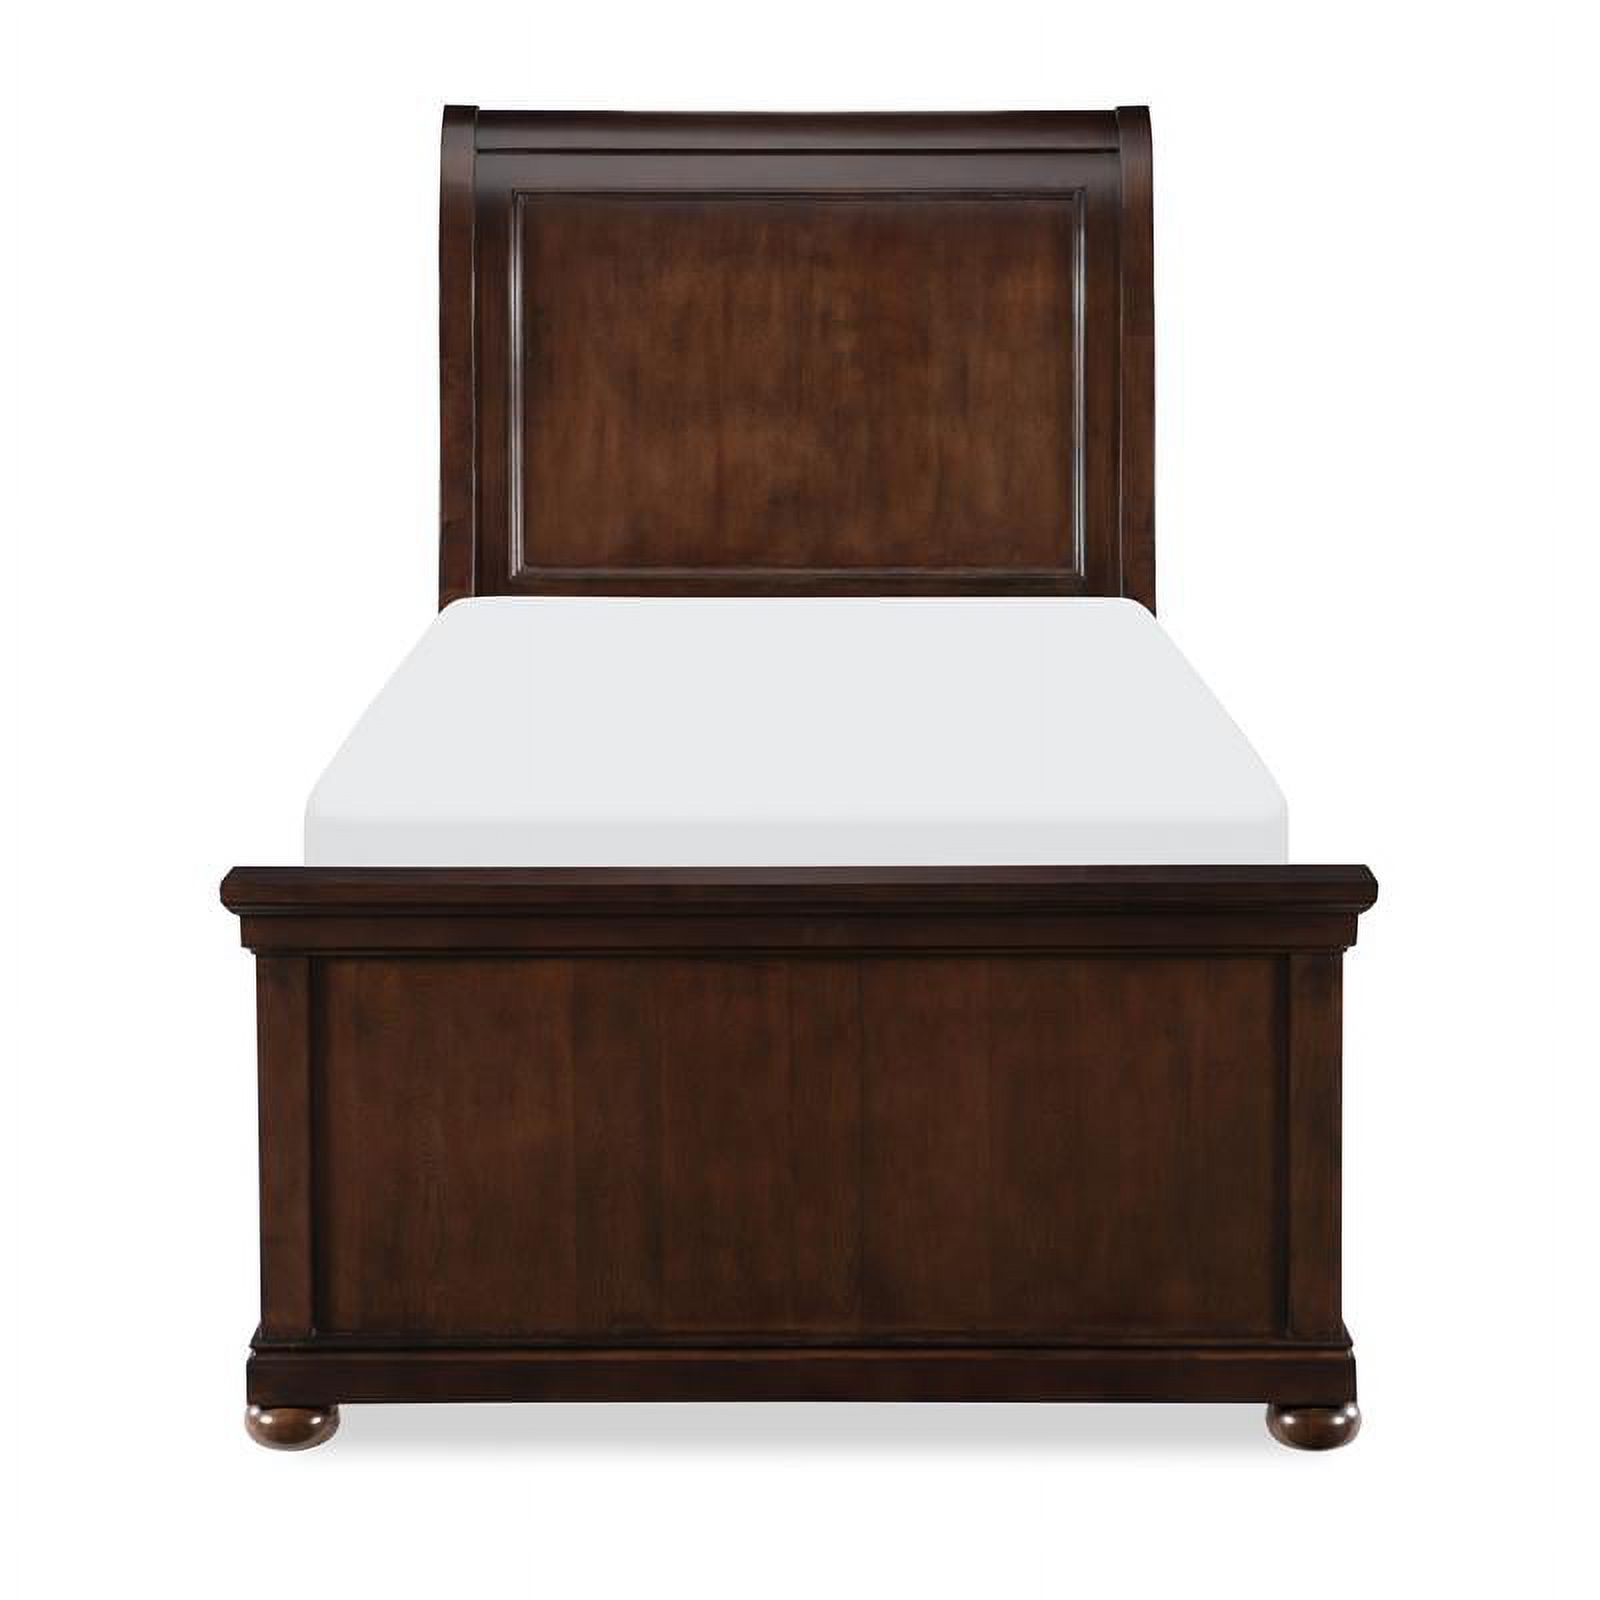 Legacy Classic Classic Canterbury Twin Sleigh Bed in Warm Cherry Finish Wood - image 2 of 4